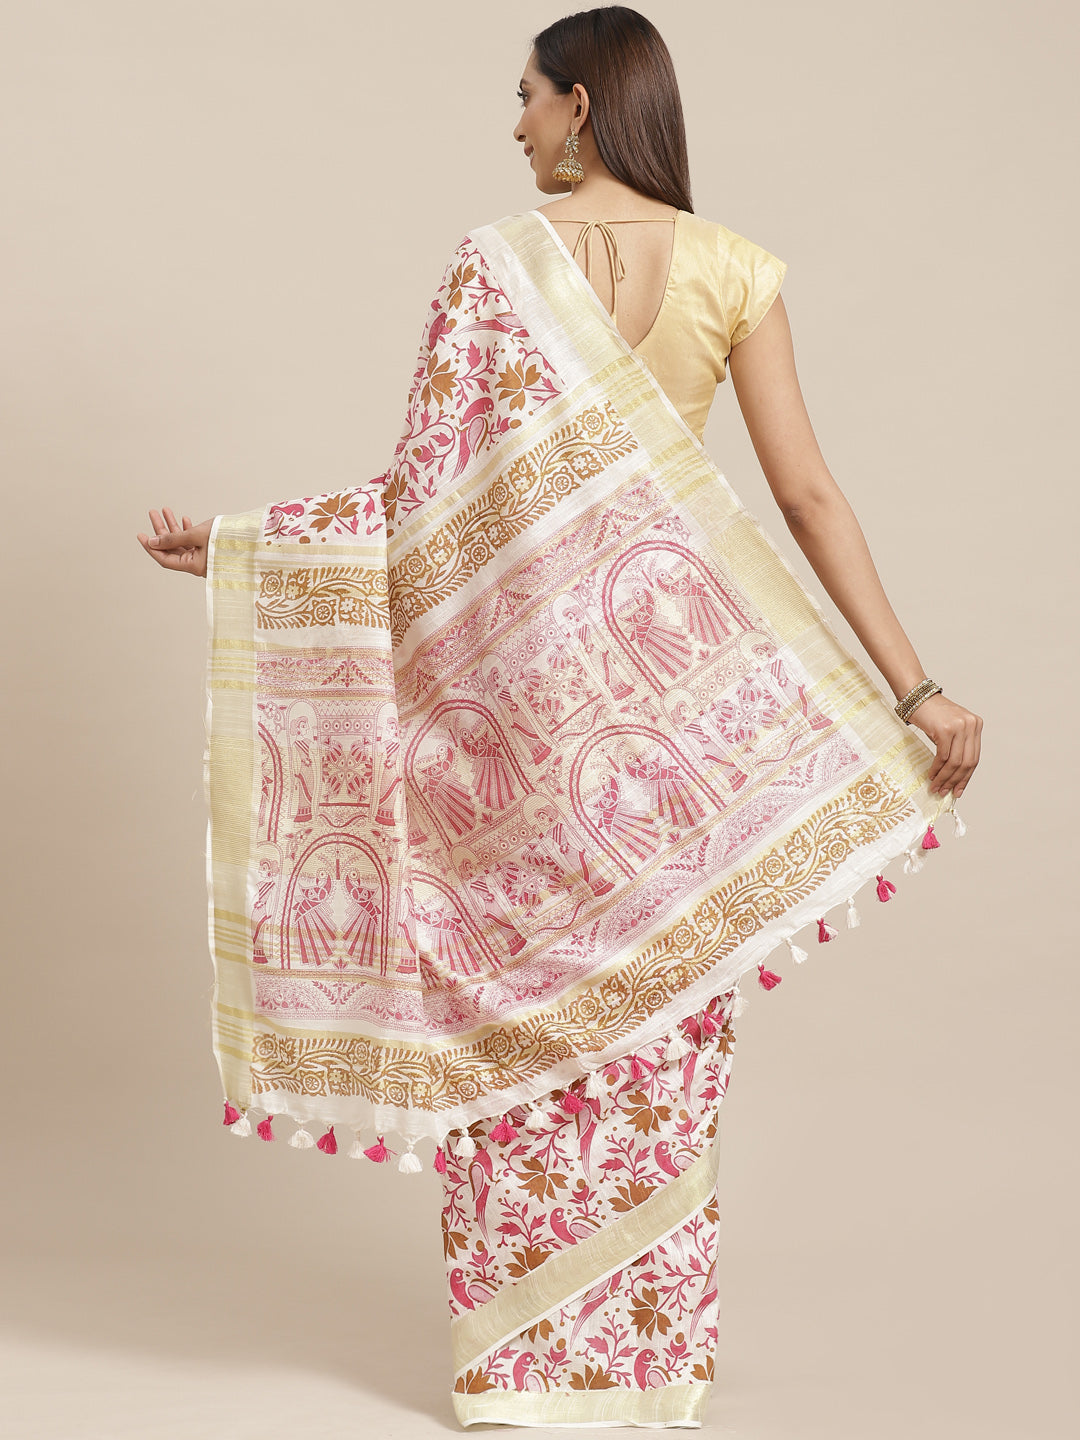 White and Pink, Kalakari India Linen Handwoven Saree and Blouse ALBGSA0095-Saree-Kalakari India-ALBGSA0095-Cotton, Geographical Indication, Hand Crafted, Heritage Prints, Linen, Natural Dyes, Red, Sarees, Shibori, Sustainable Fabrics, Woven, Yellow-[Linen,Ethnic,wear,Fashionista,Handloom,Handicraft,Indigo,blockprint,block,print,Cotton,Chanderi,Blue, latest,classy,party,bollywood,trendy,summer,style,traditional,formal,elegant,unique,style,hand,block,print, dabu,booti,gift,present,glamorous,afford